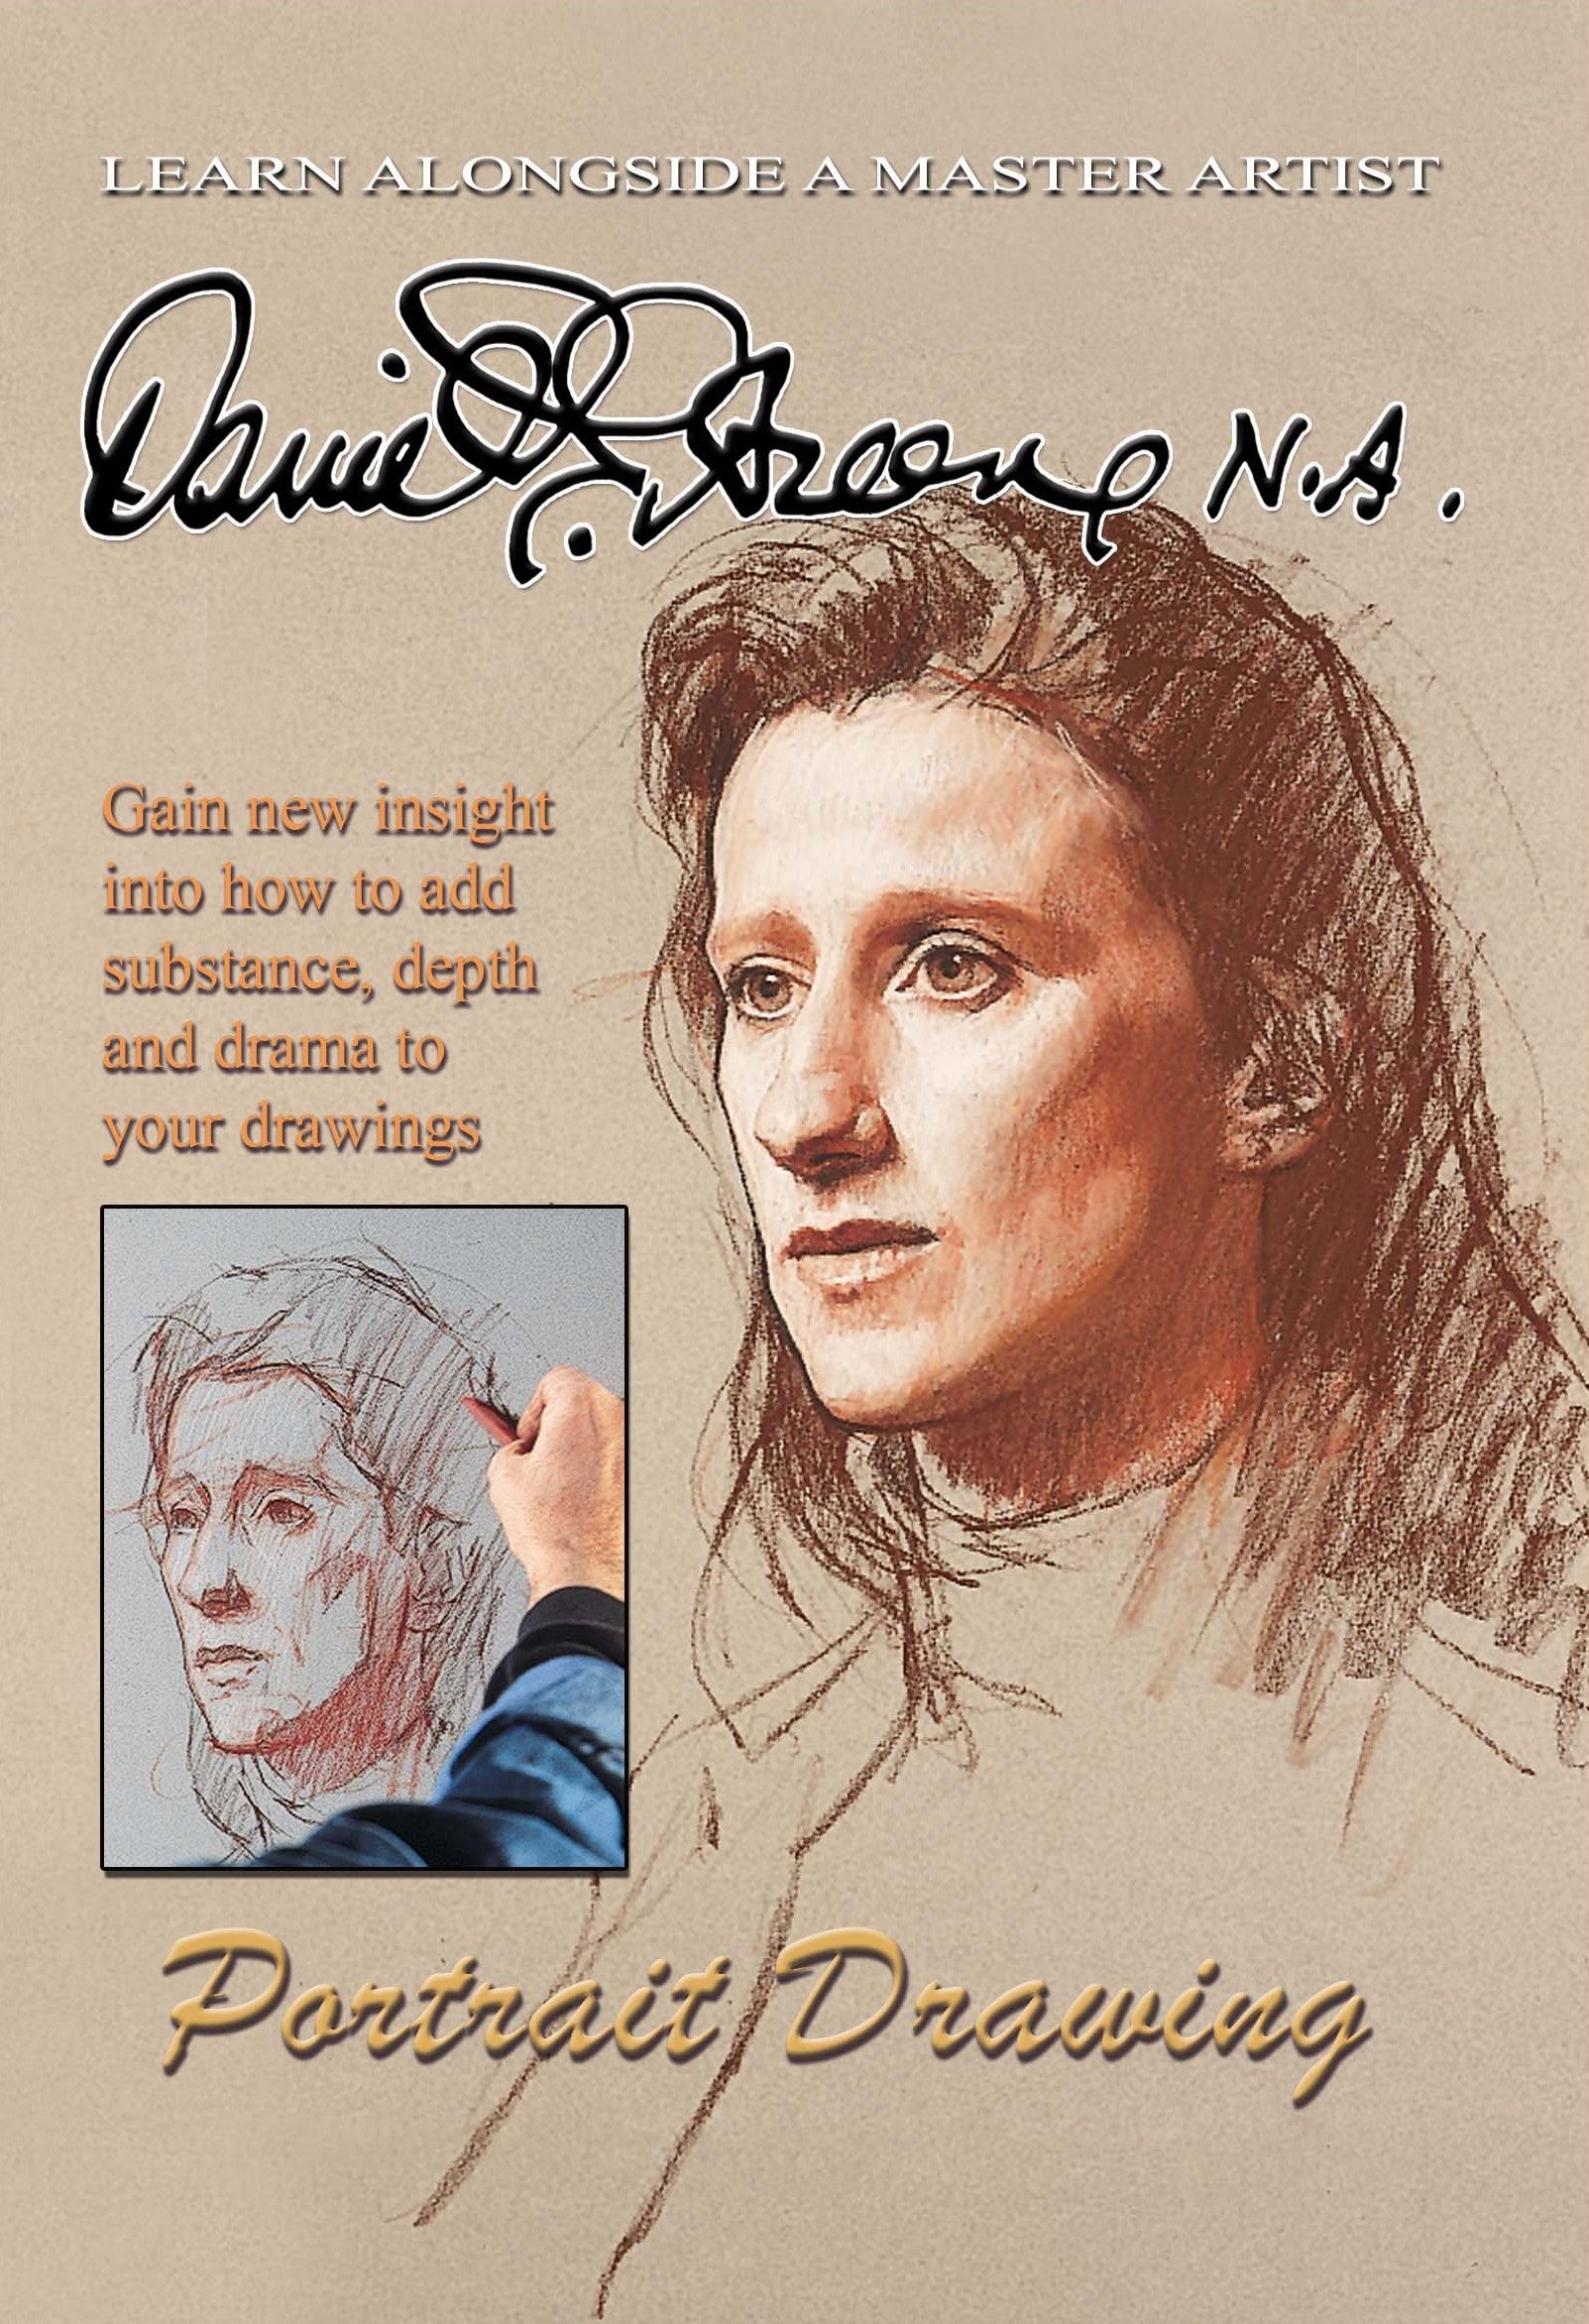 On Air Video: Learn to See, Learn To Draw